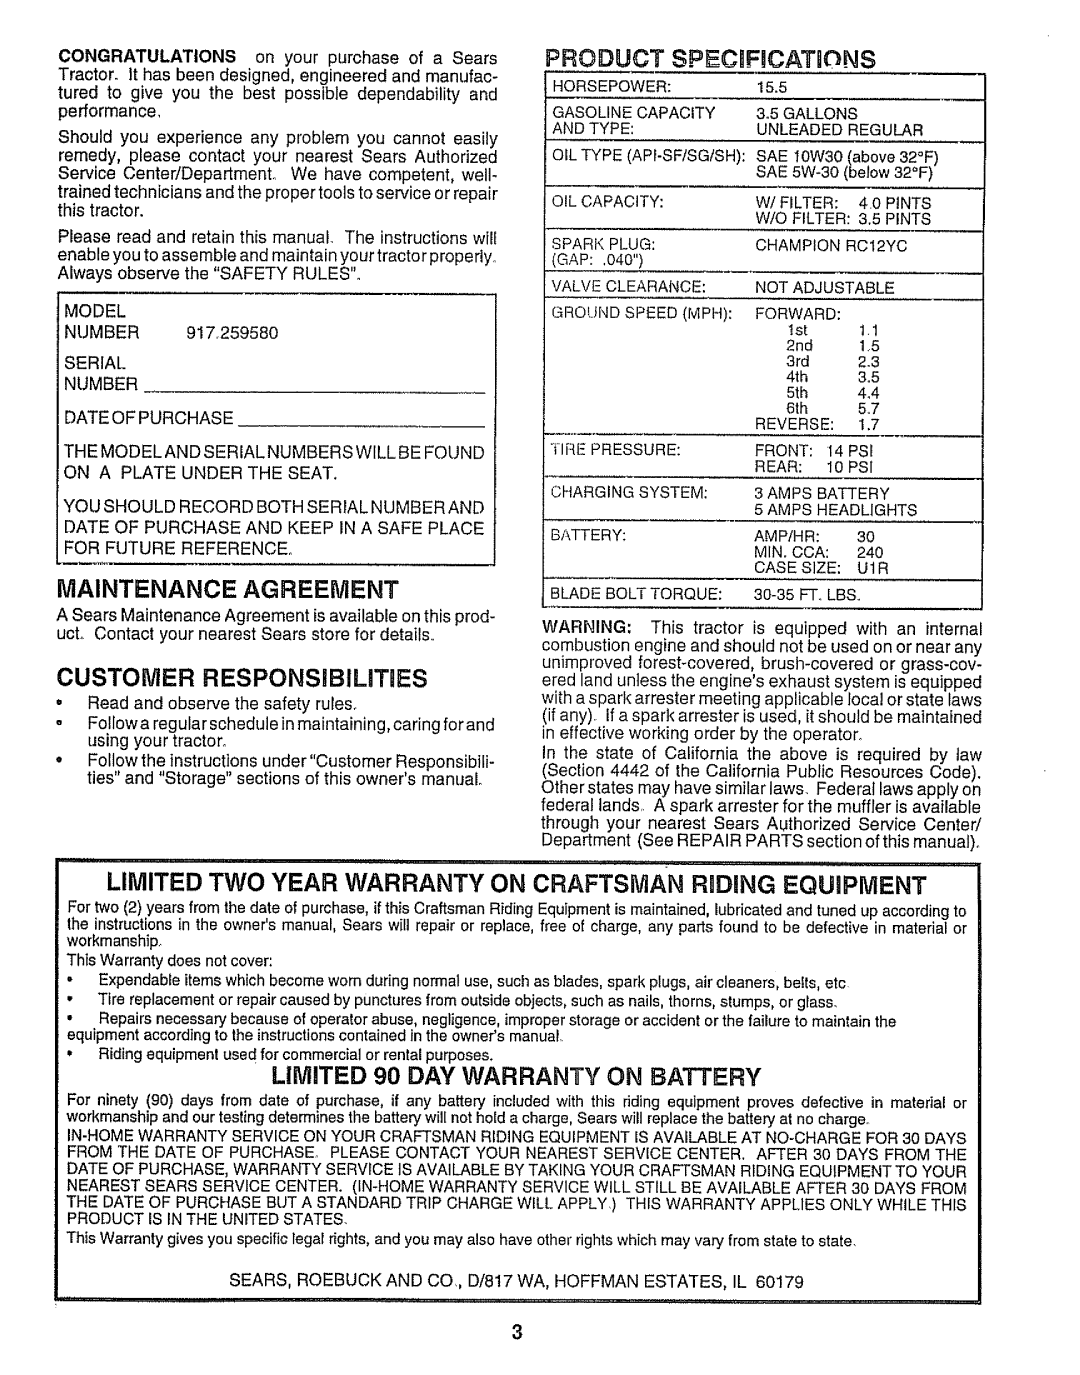 Sears 917.25958 manual Maintenance Agreement, CUSTOMER RESPONSIBILiTiES, PRODUCT SPECIFiCATiONS 